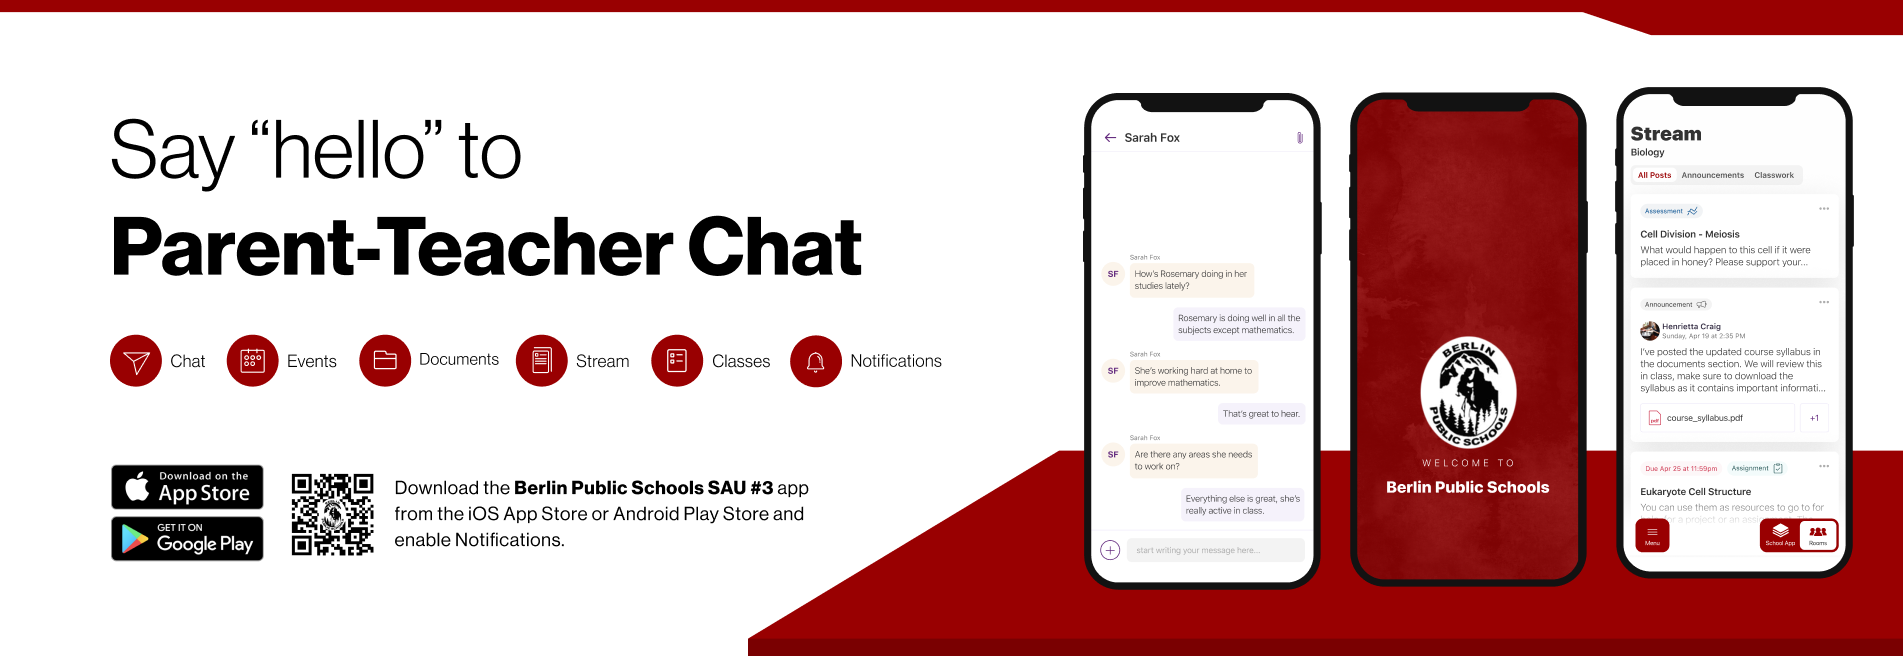 Say hello to Parent-Teacher chat in the new Rooms app. Download the Berlin Public Schools app in the Google Play or Apple App store.